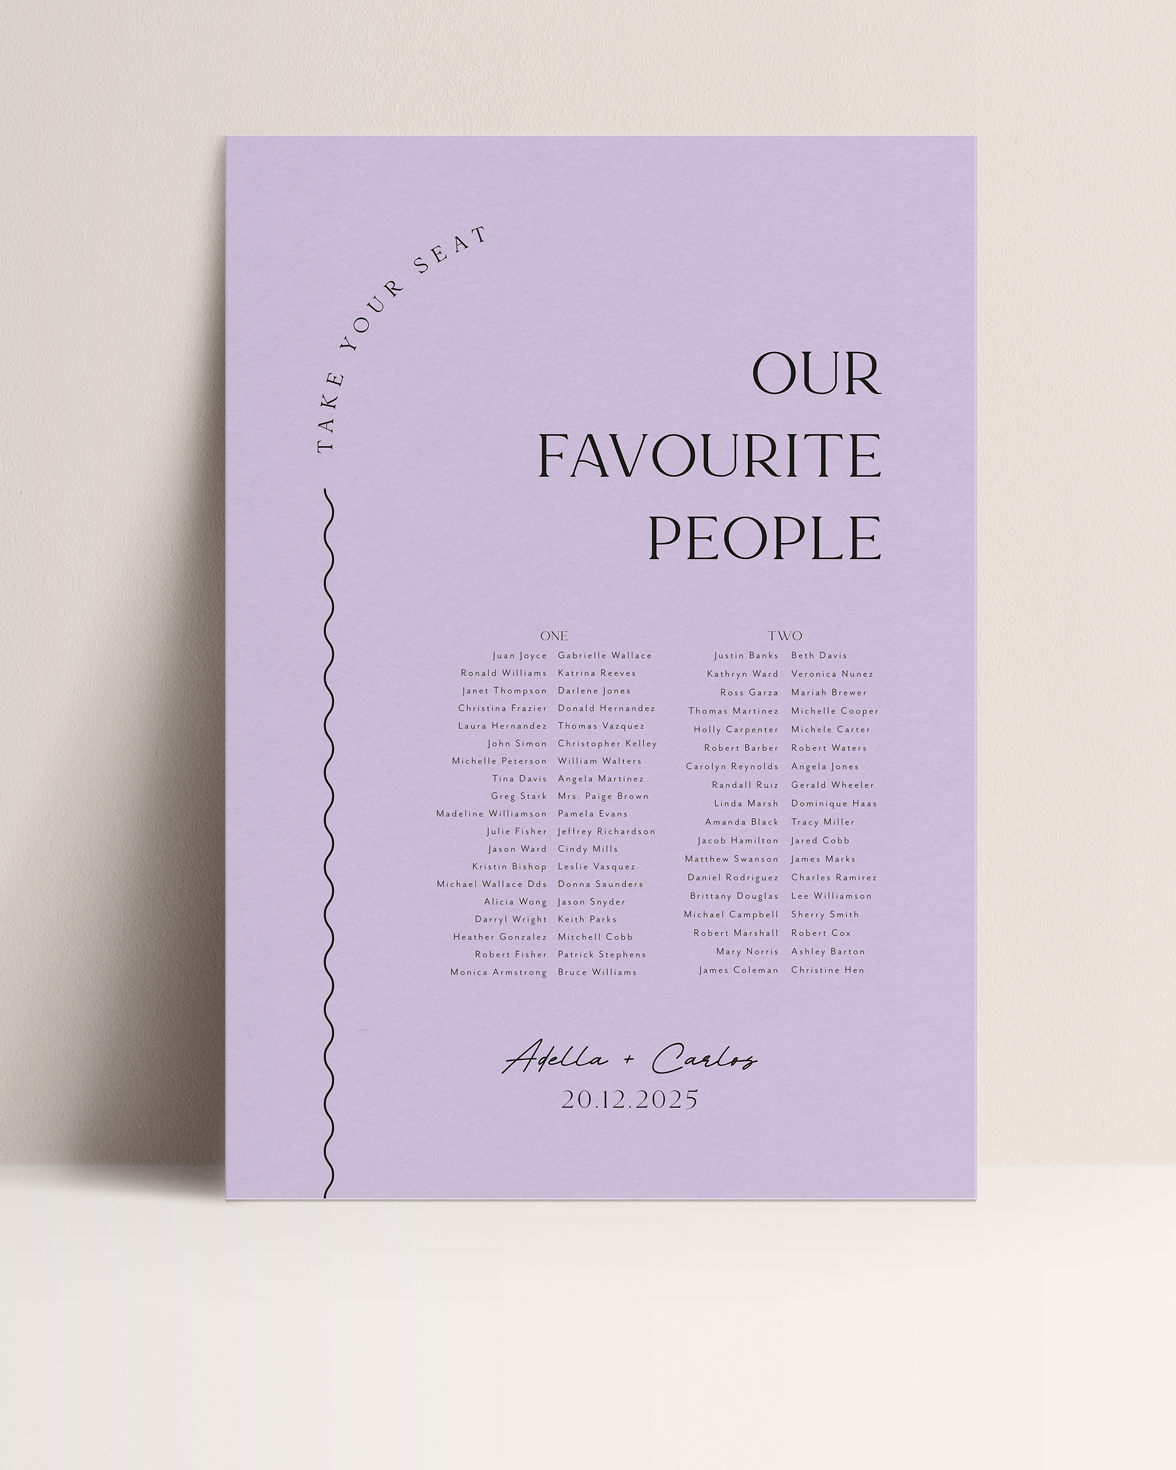 Purple wedding table plan with squiggly line. Reads take a seat our favourite people